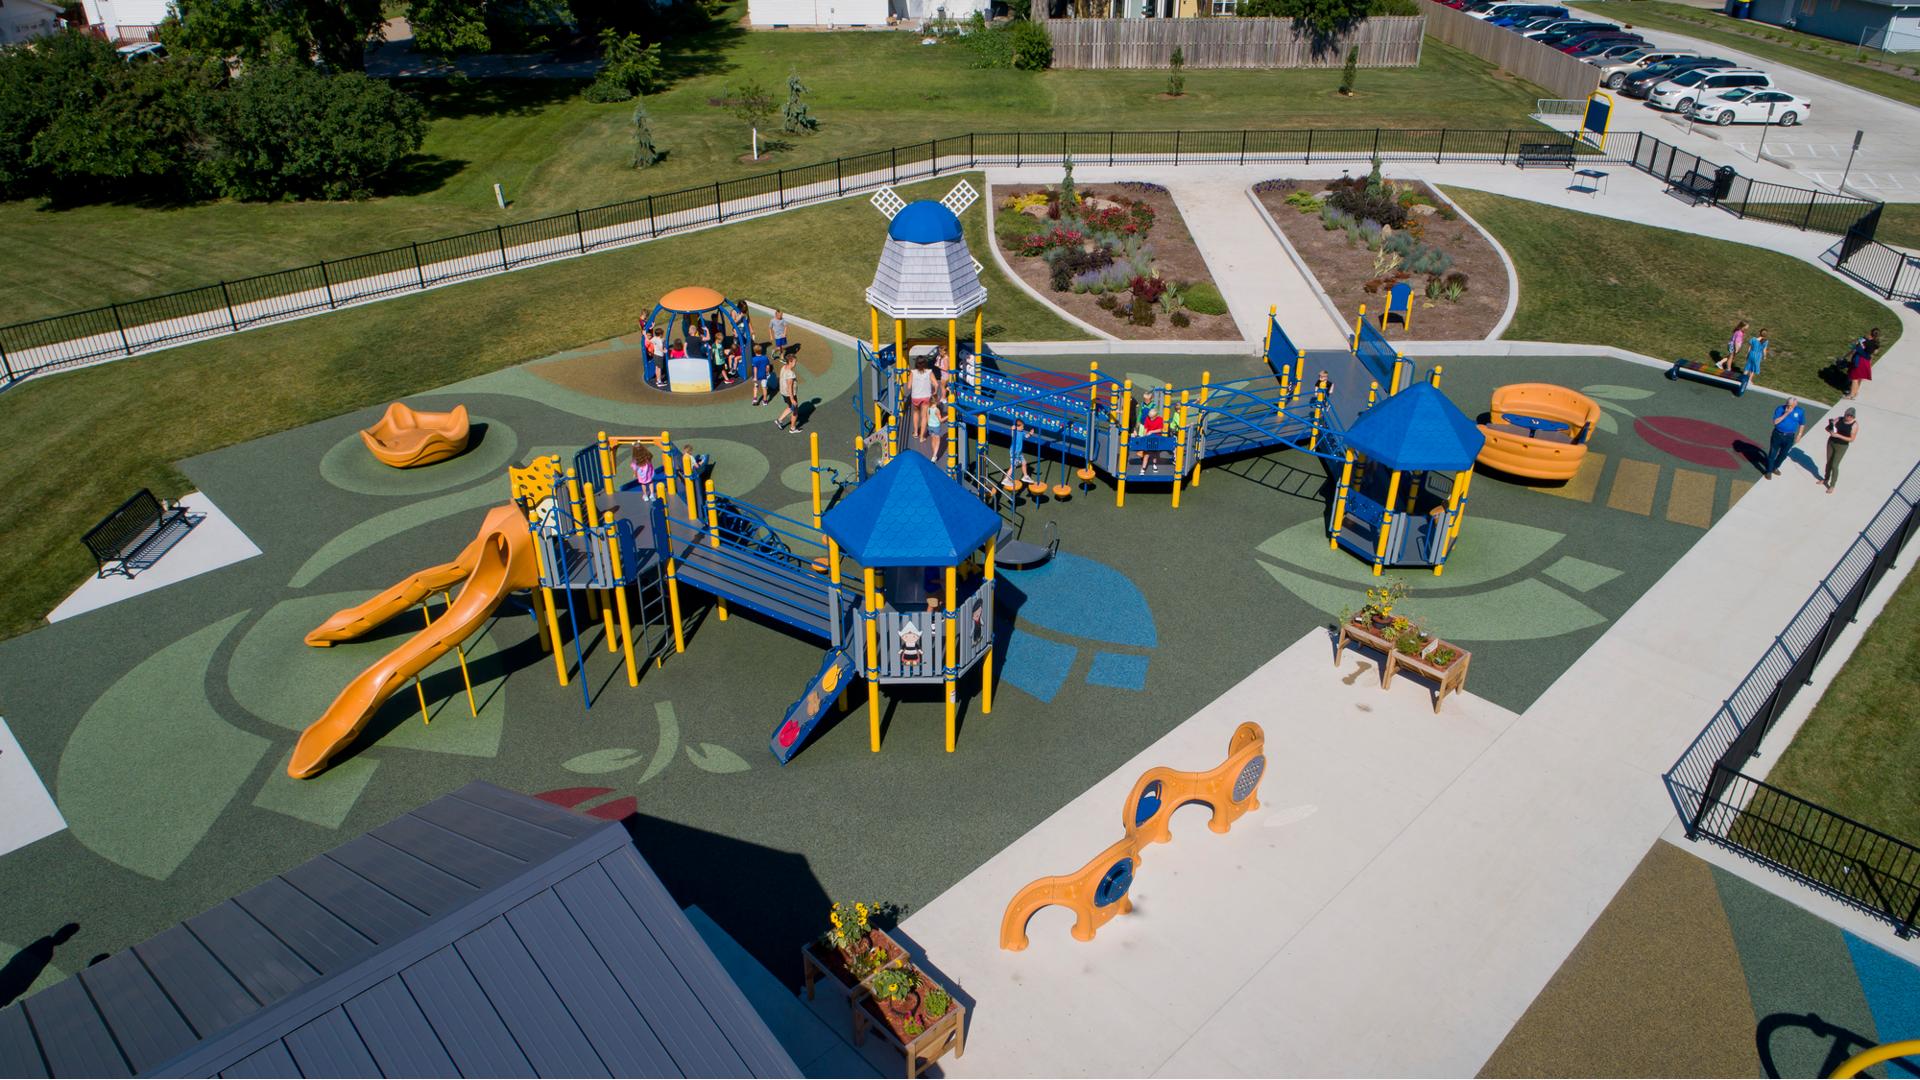 Elevated view of an inclusive Dutch themed playground surrounded by a black iron fence. The safety surfacing is designed with tulip shapes, a roof top like a windmill, and children cut outs dressed in Dutch costumes. Children play on a manual carousel next to the large play structure.